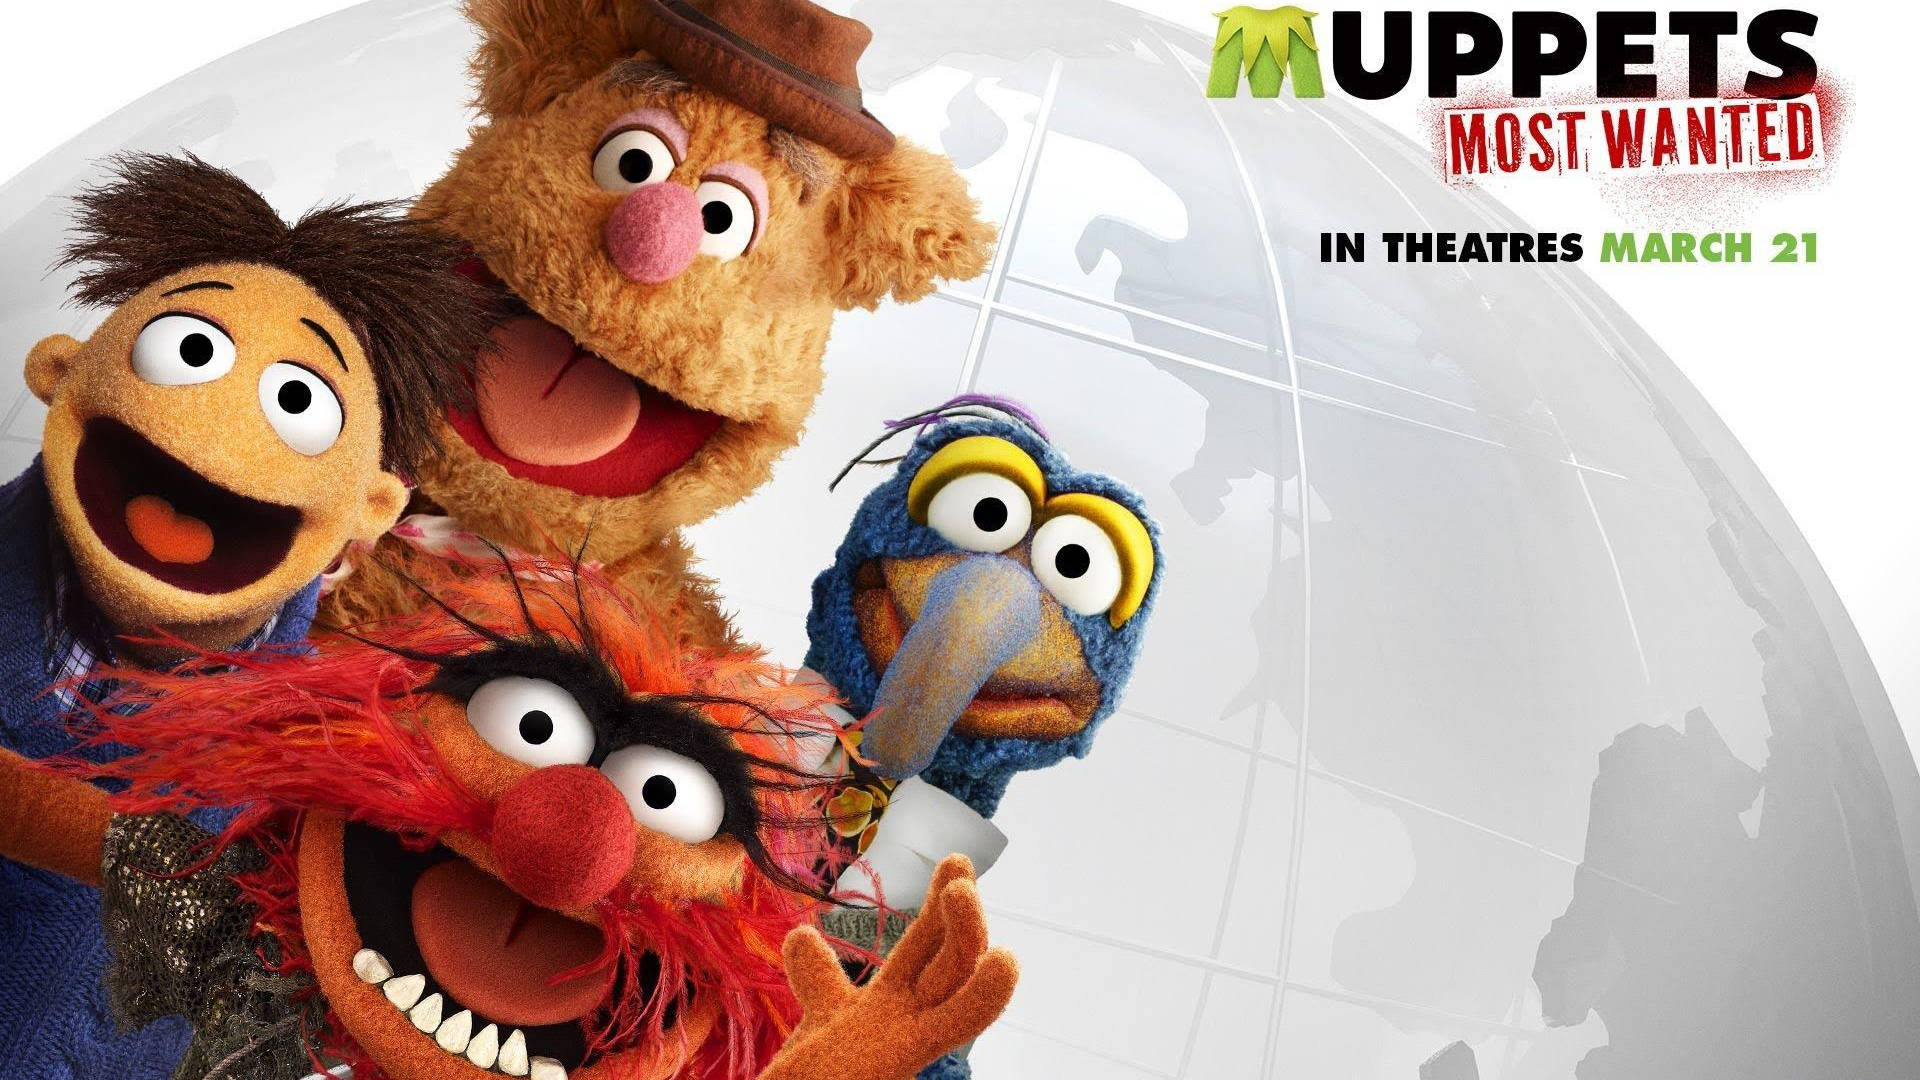 Muppets Most Wanted Walter, Fozzie, Animal, Gonzo